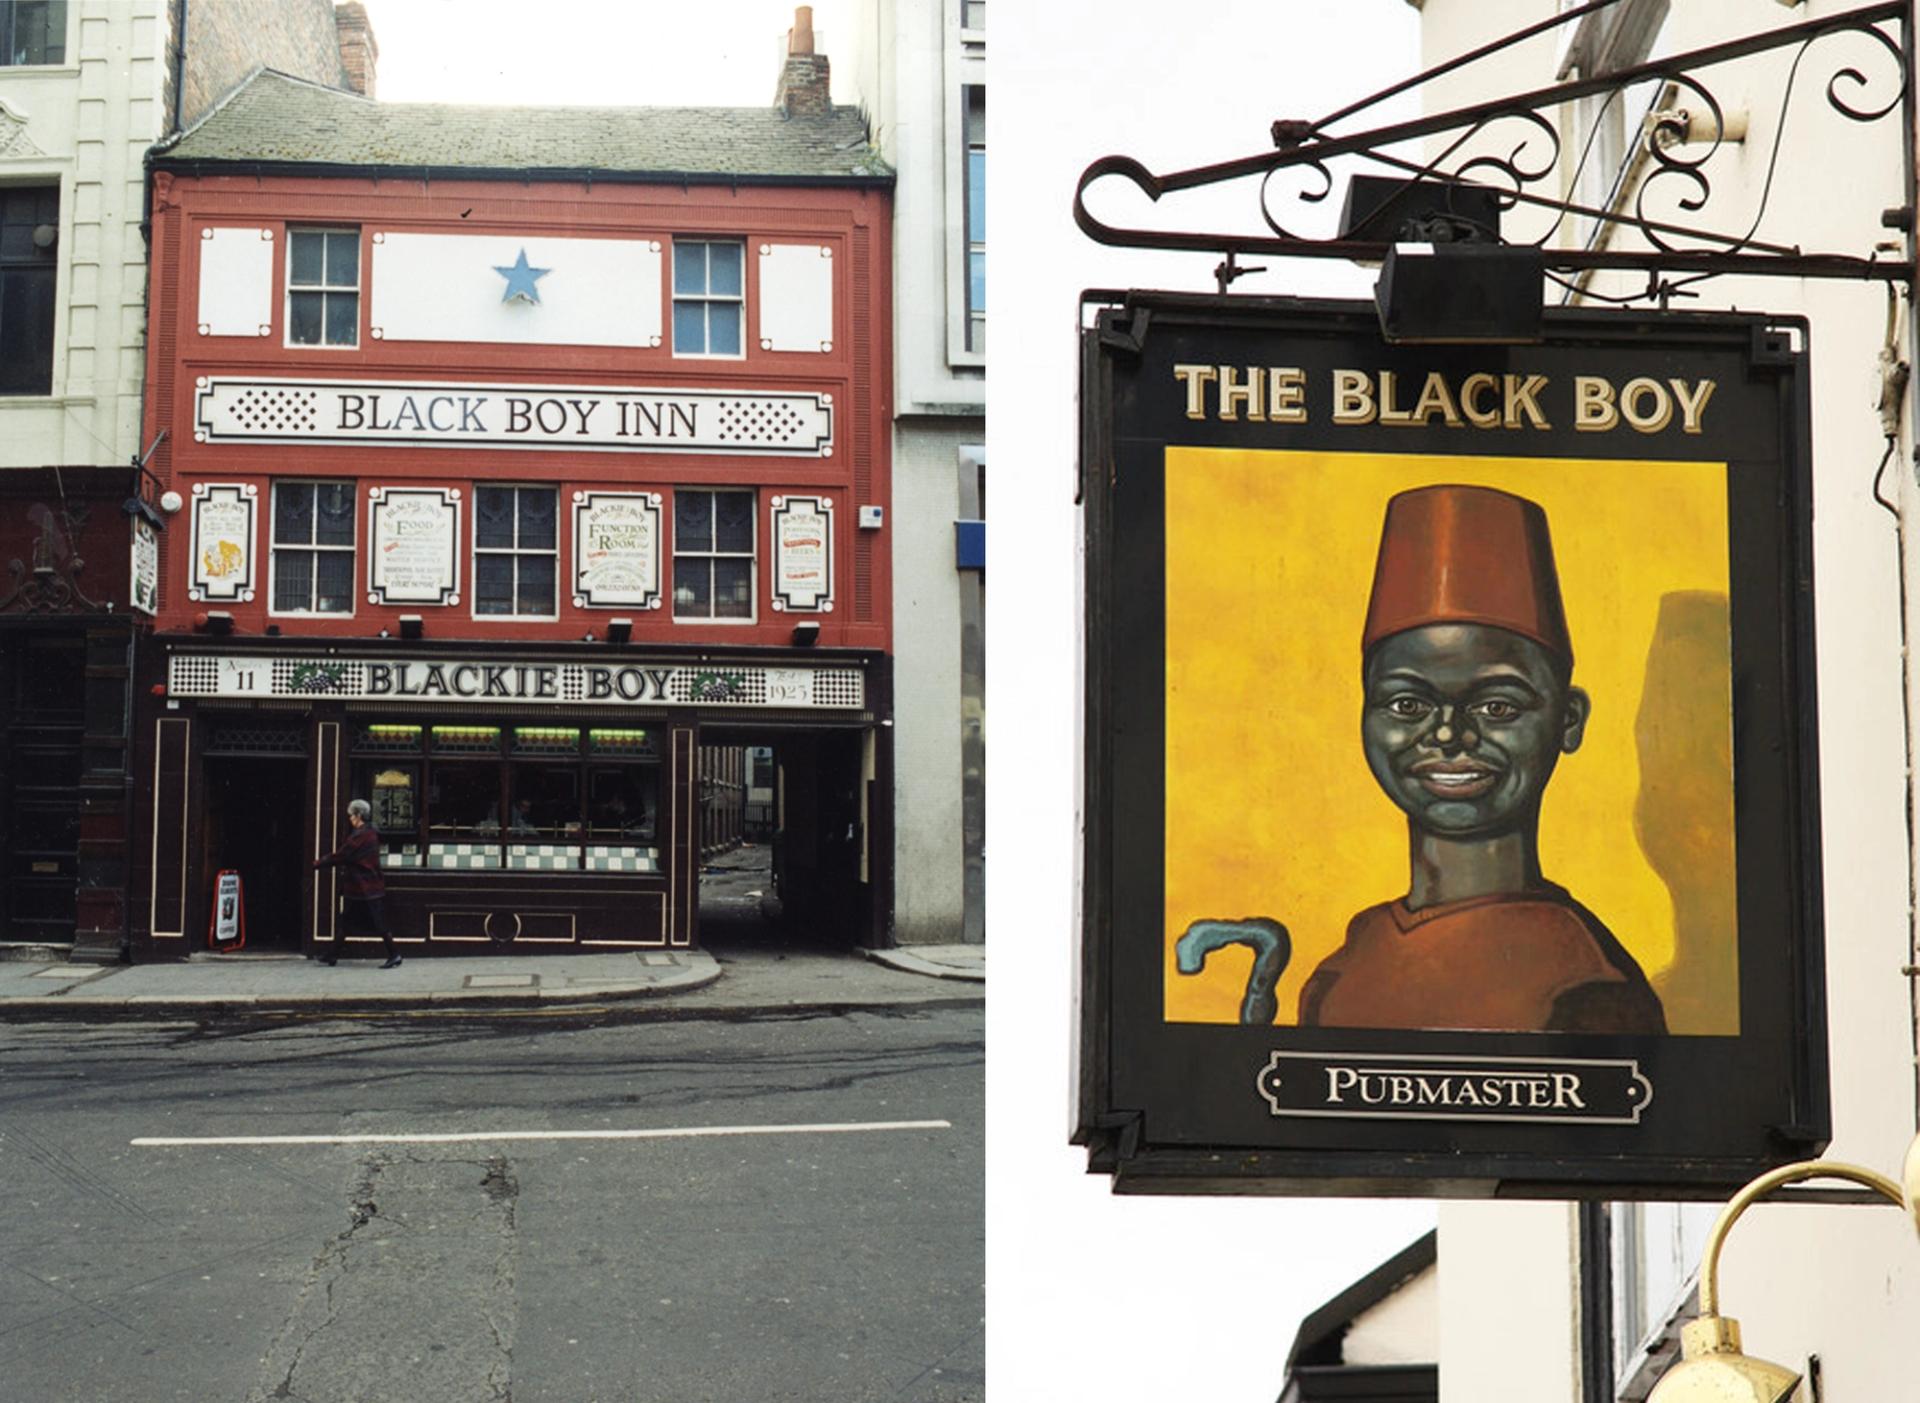 The kind of pub signs that the Guyanese-born British artist and photographer Ingrid Pollard researched for her project Seventeen of Sixty Eight (2018), exploring representation of the Black figure in British life Photo: courtesy of Newcastle Libraries (left); Richard Croft / The sign of The Black Boy / CC BY-SA 2.0 (right)